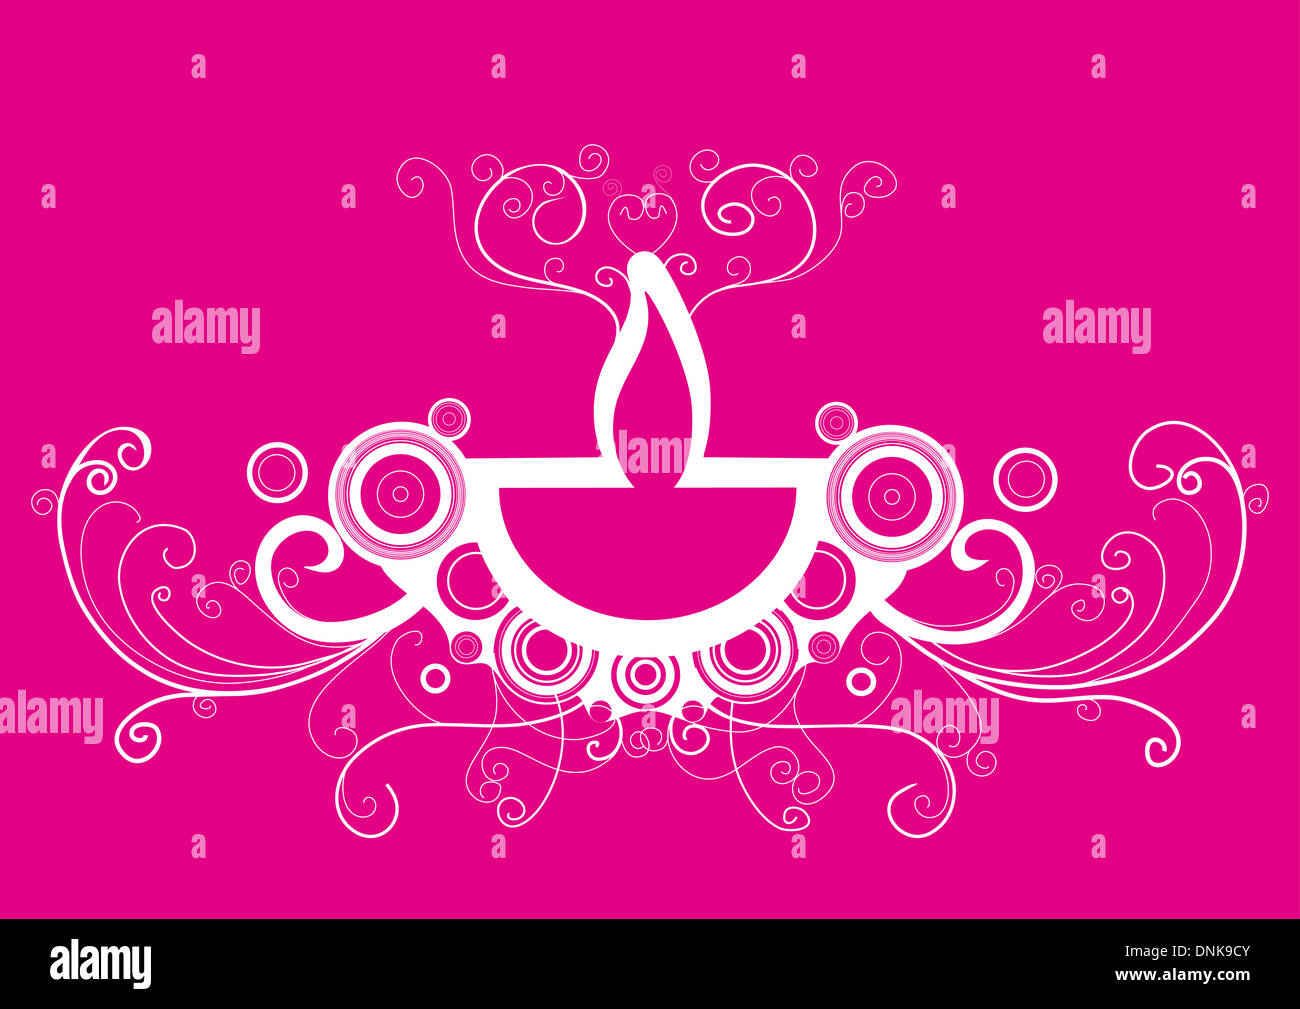 Diwali oil lamp isolated on pink background Stock Photo